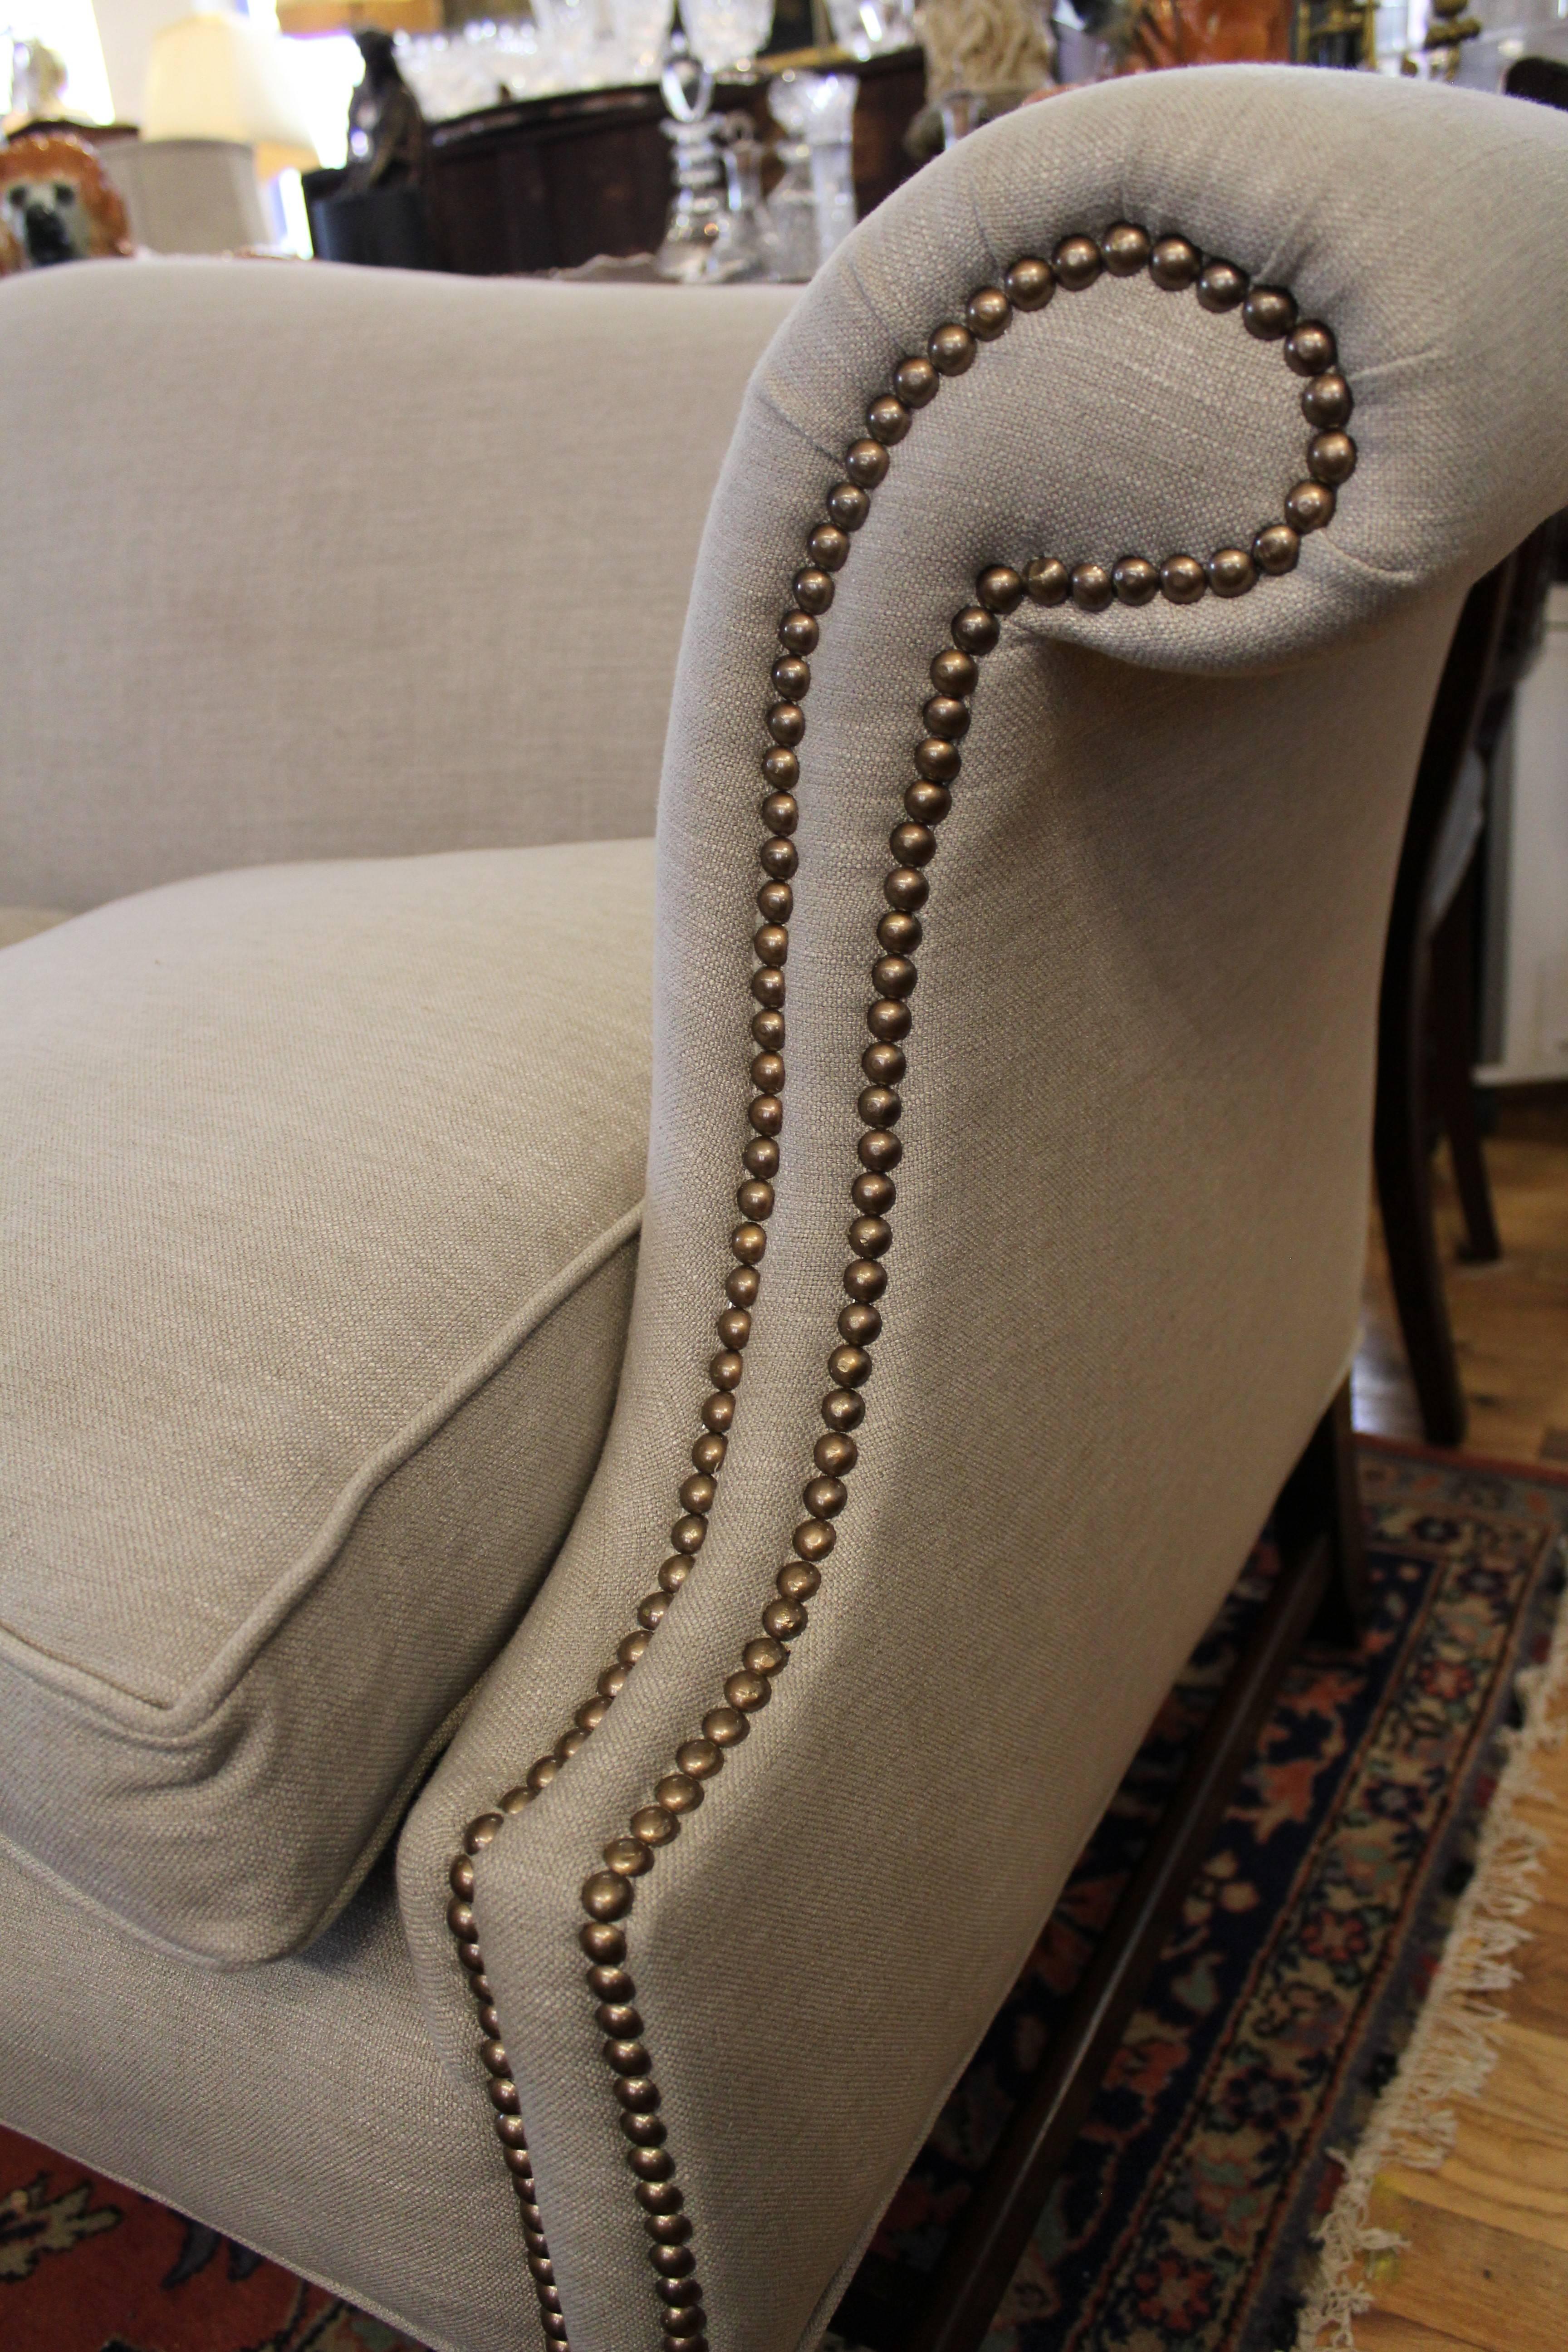 Antique Camelback sofa in the Chippendale style with Marlborough fluted front legs, scrolled arms with brass studded trim and down filled cushions all beautifully re-upholstered in a soft cream or beige fabric.

          